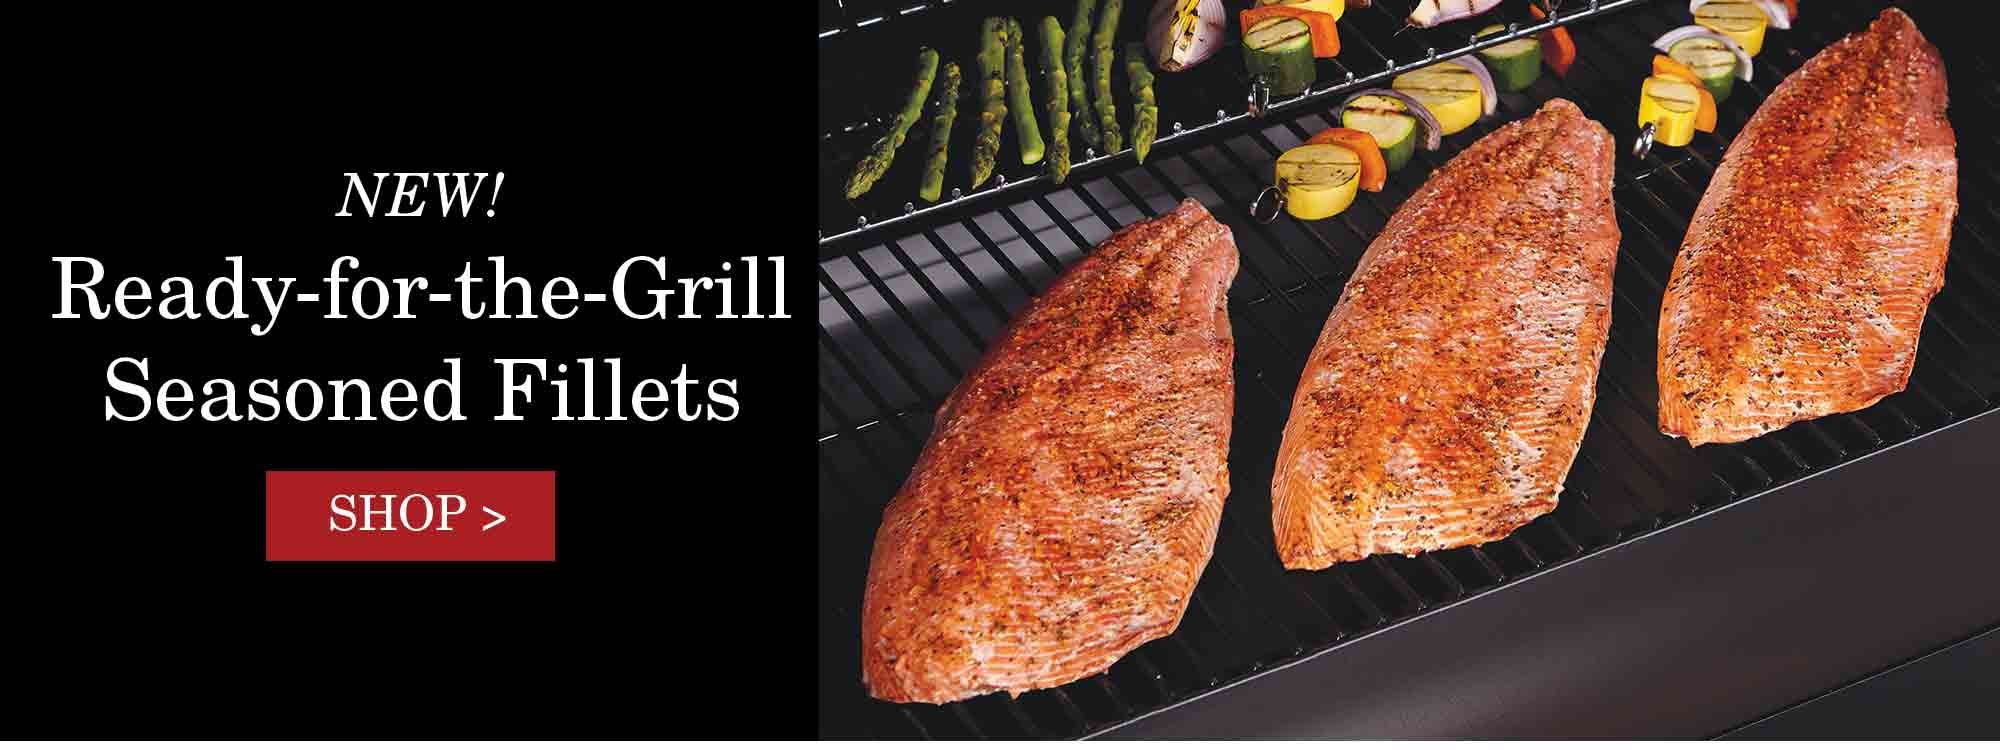 Ready-for-the-Grill Seasoned Fillets